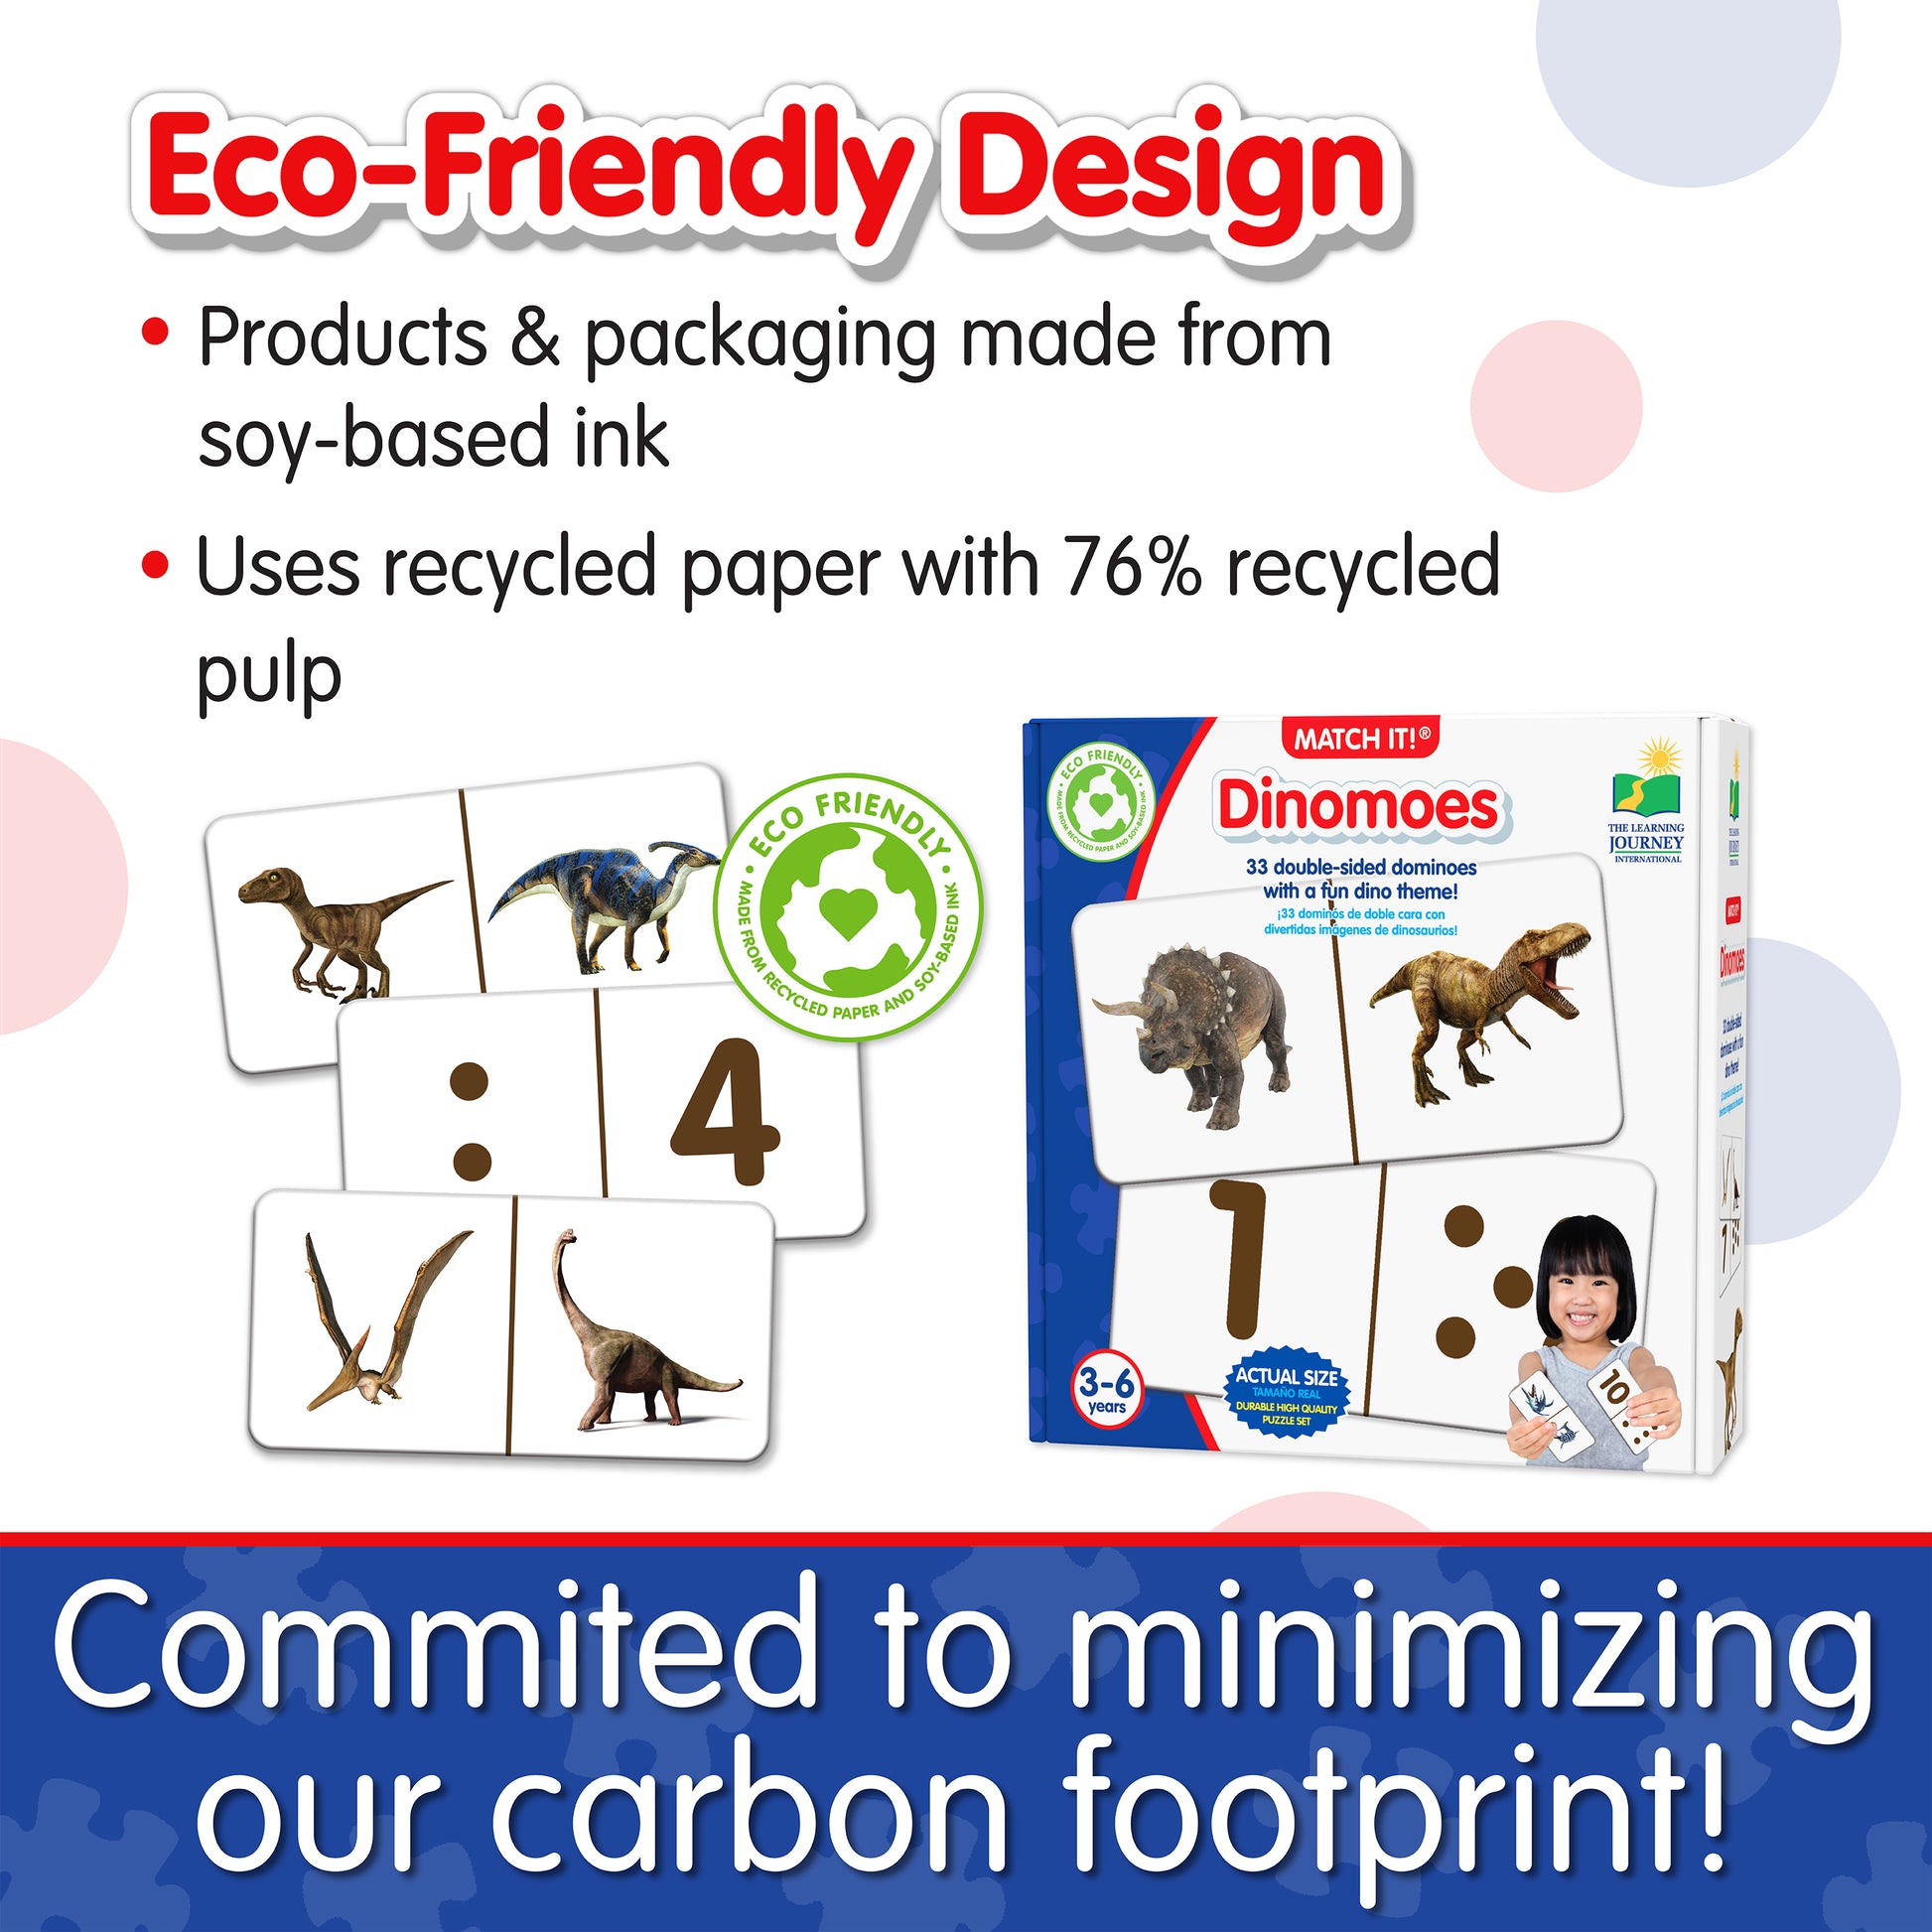 Infographic about Match It - Dinomoes' eco-friendly design that says, "Committed to minimizing our carbon footprint!"